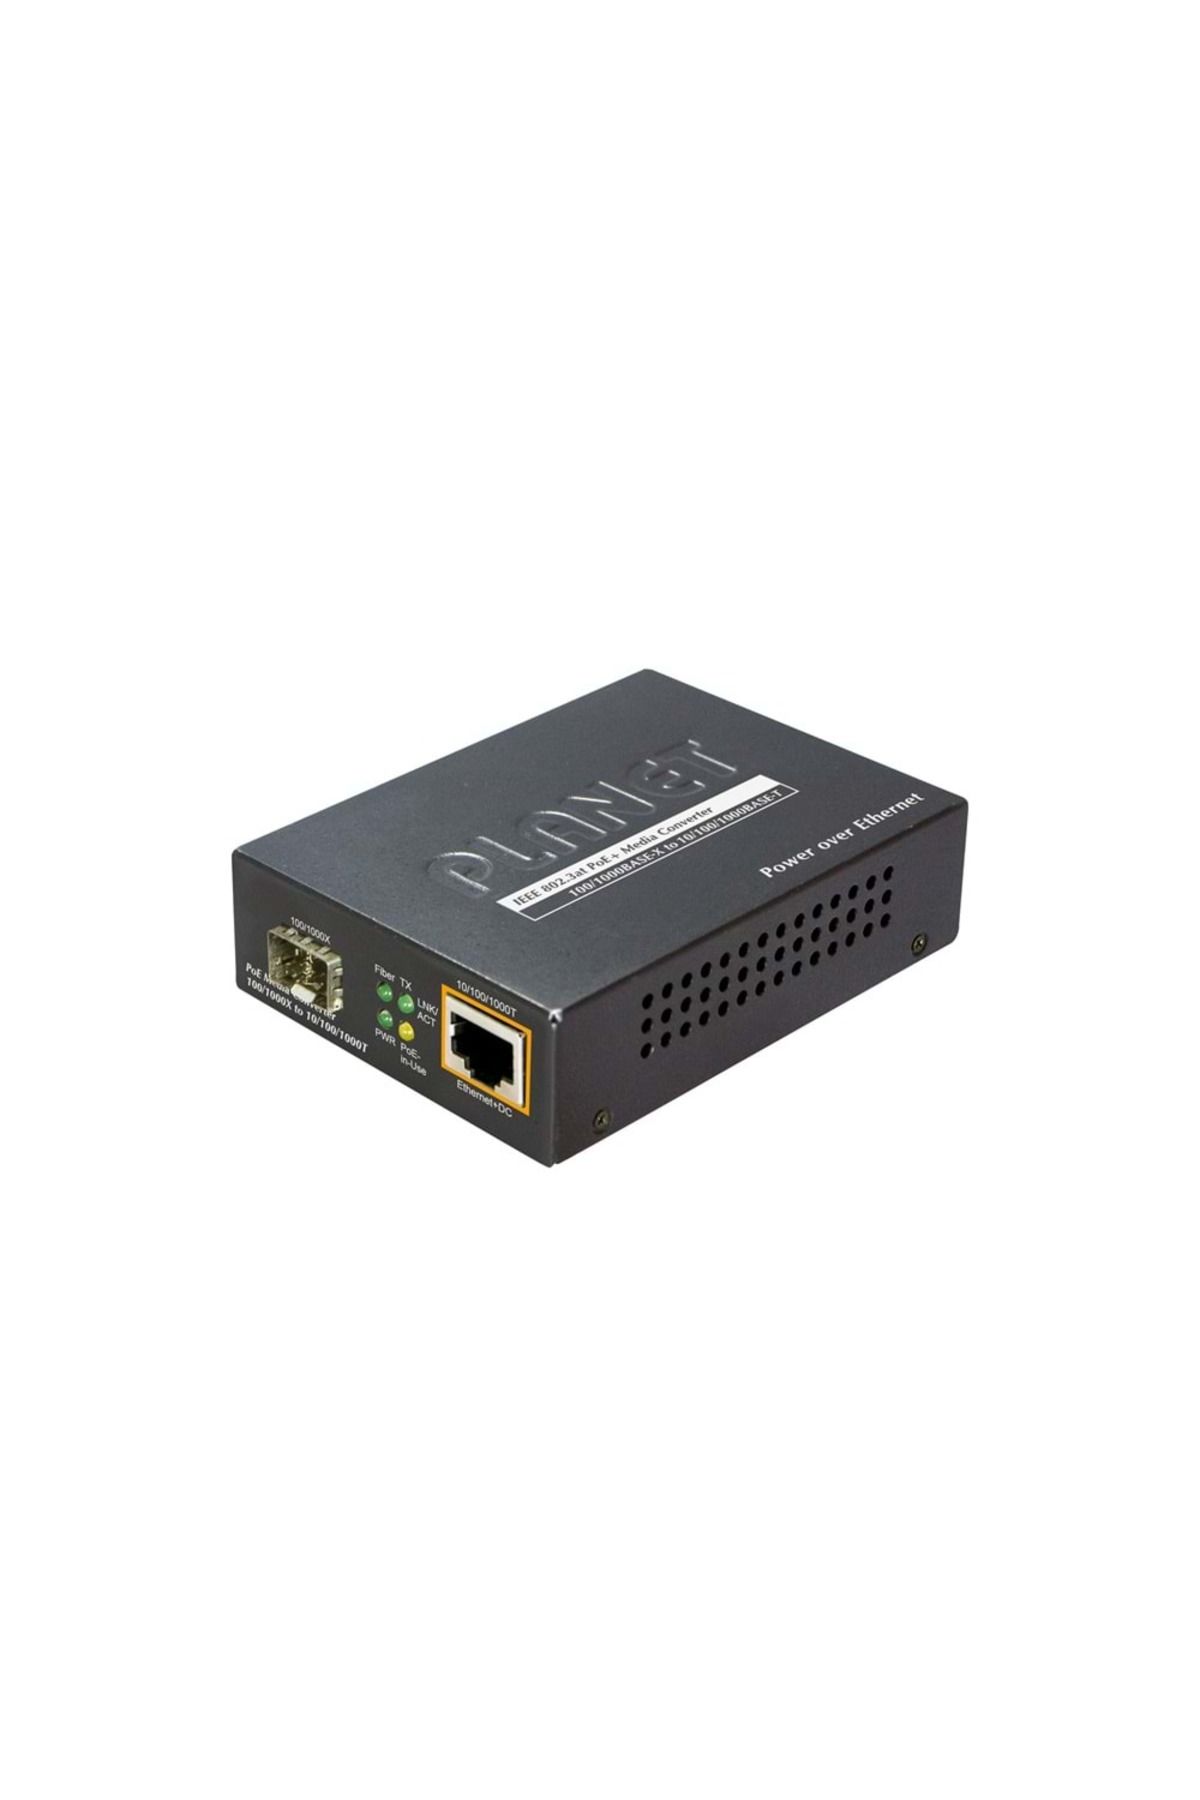 Planet IEEE802.3af PoE 10/100/1000Base-T to MiniGBIC (SFP) Converter